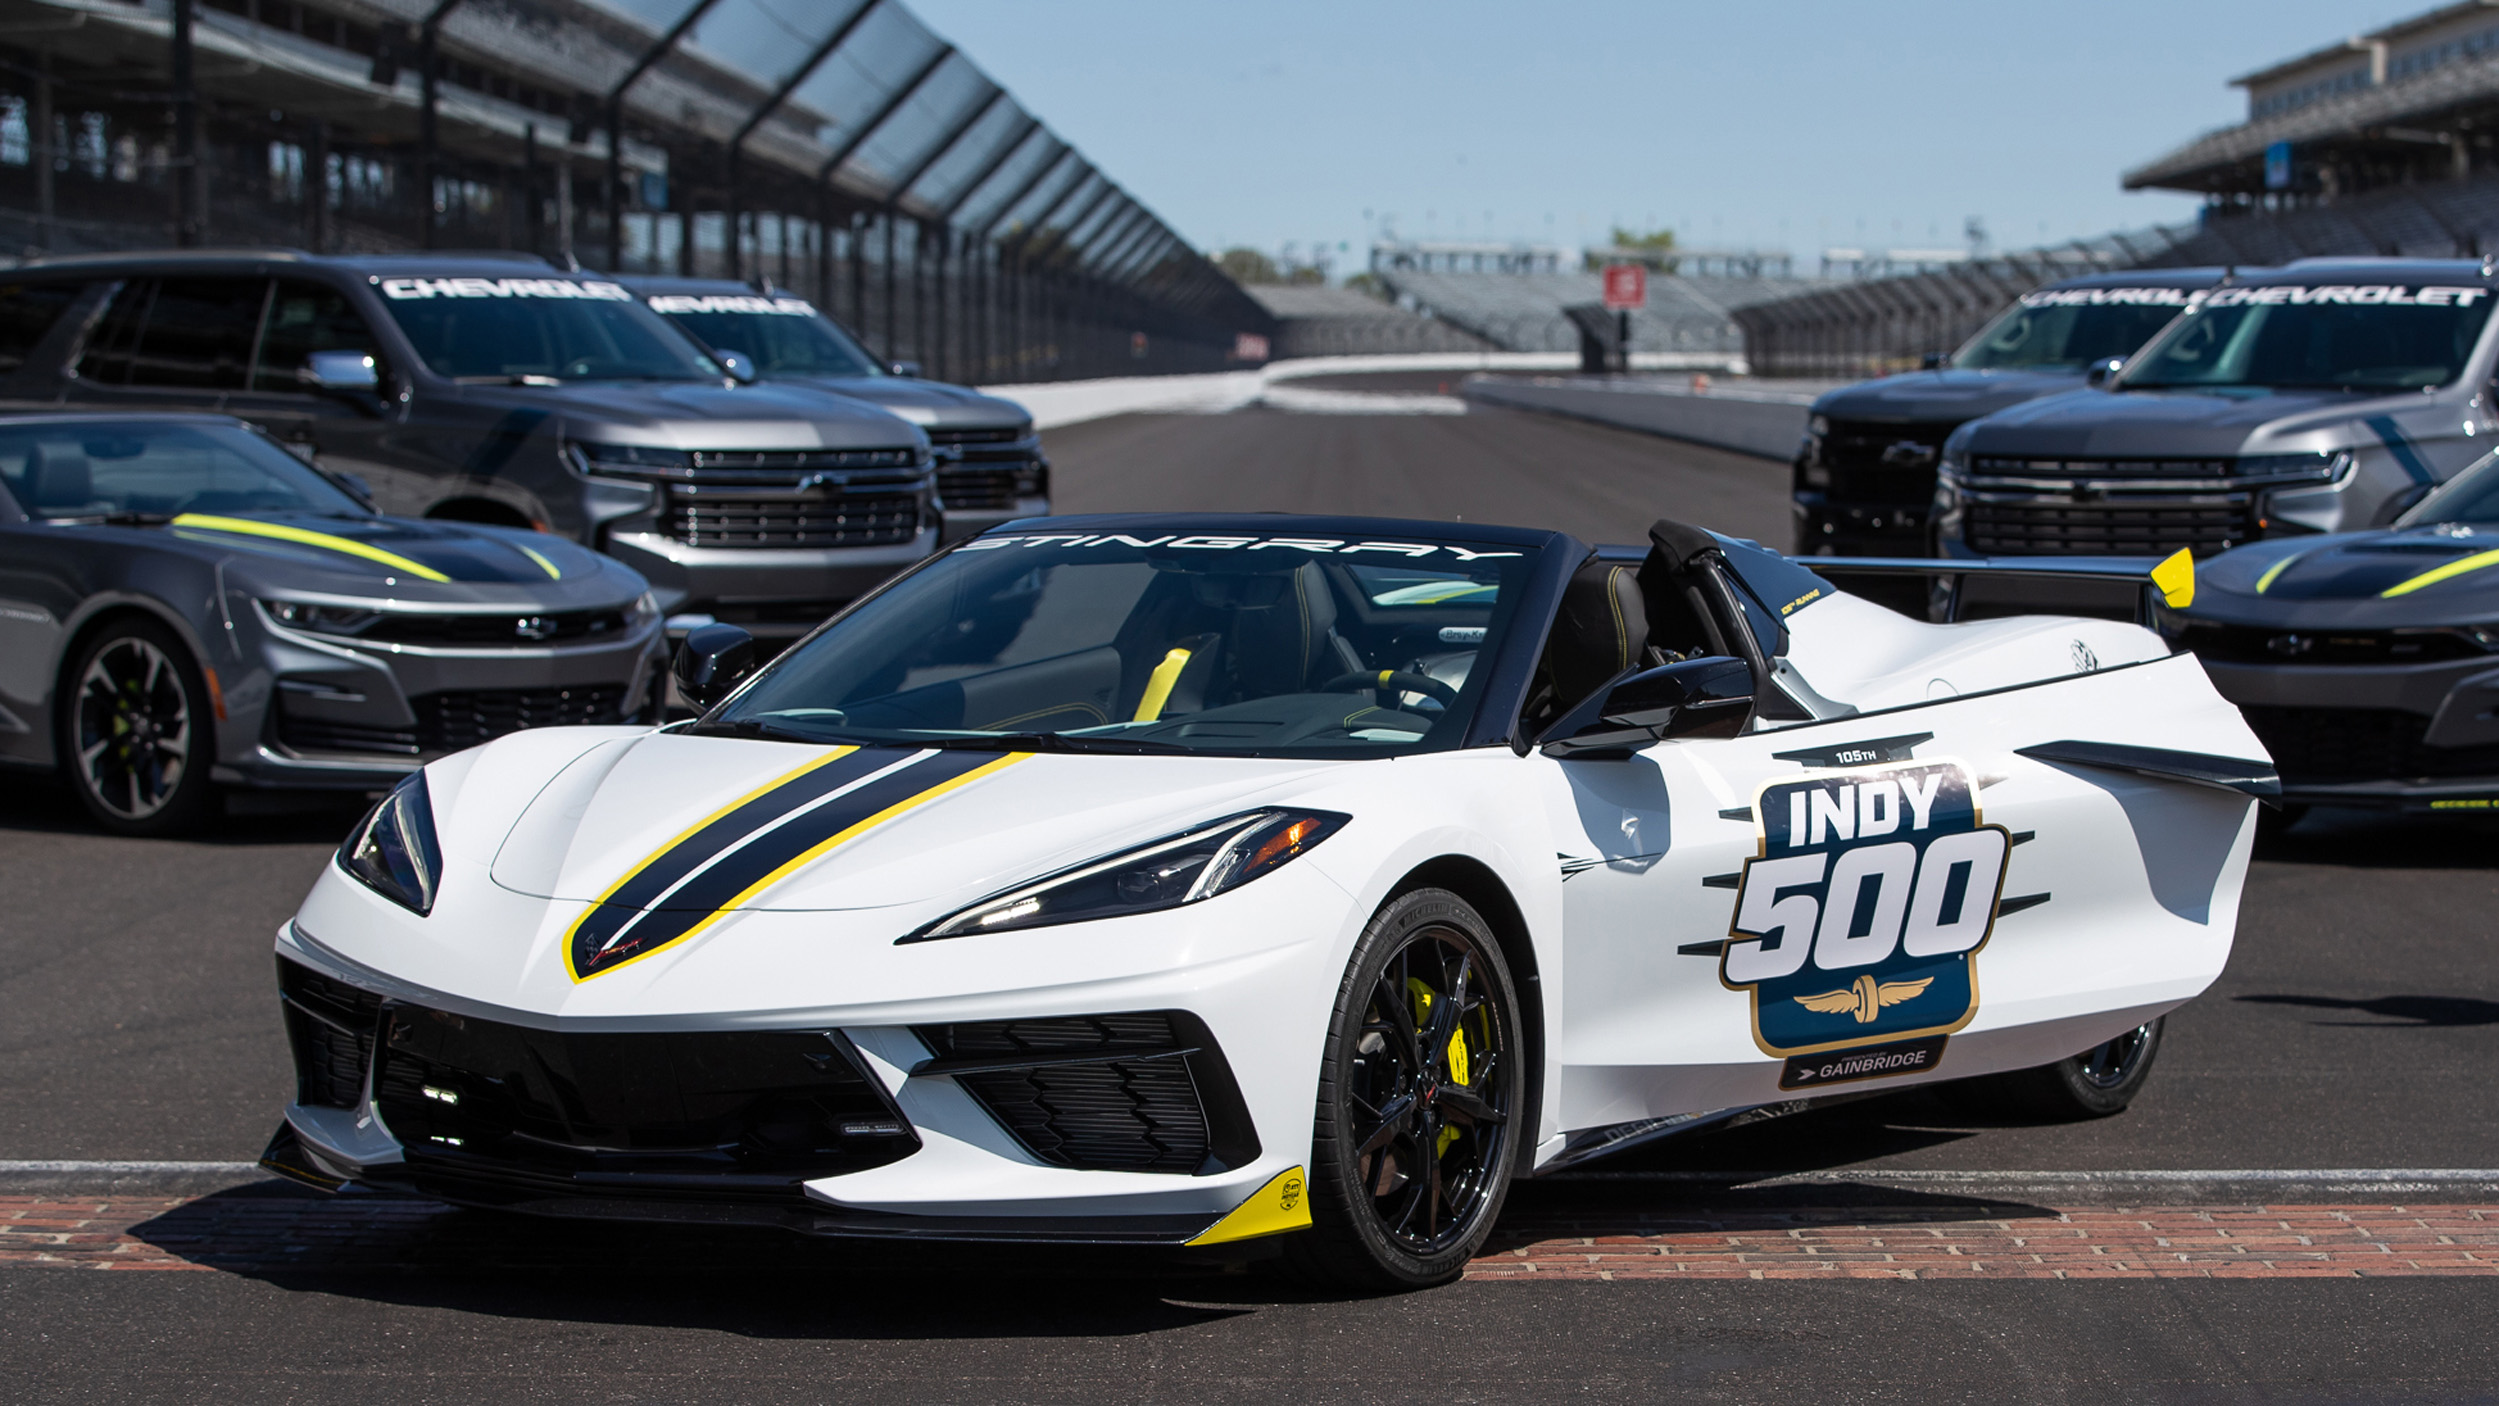 105th Indy 500 official pace car Photo Gallery